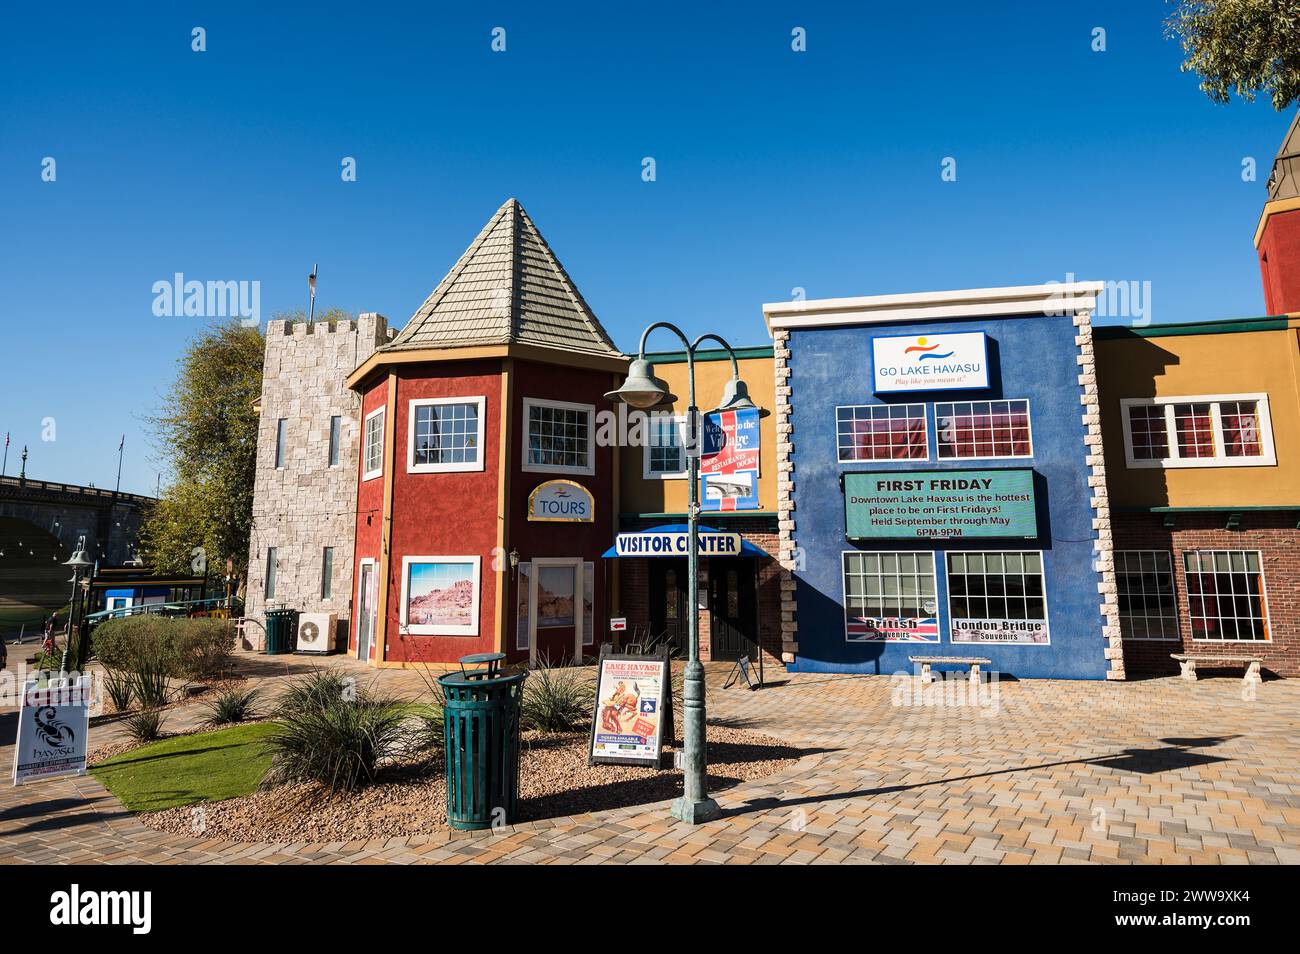 Visitor Center near the old London Bridge, which was relocated from London England in the 1970’s to Lake Havasu Arizona. Stock Photo